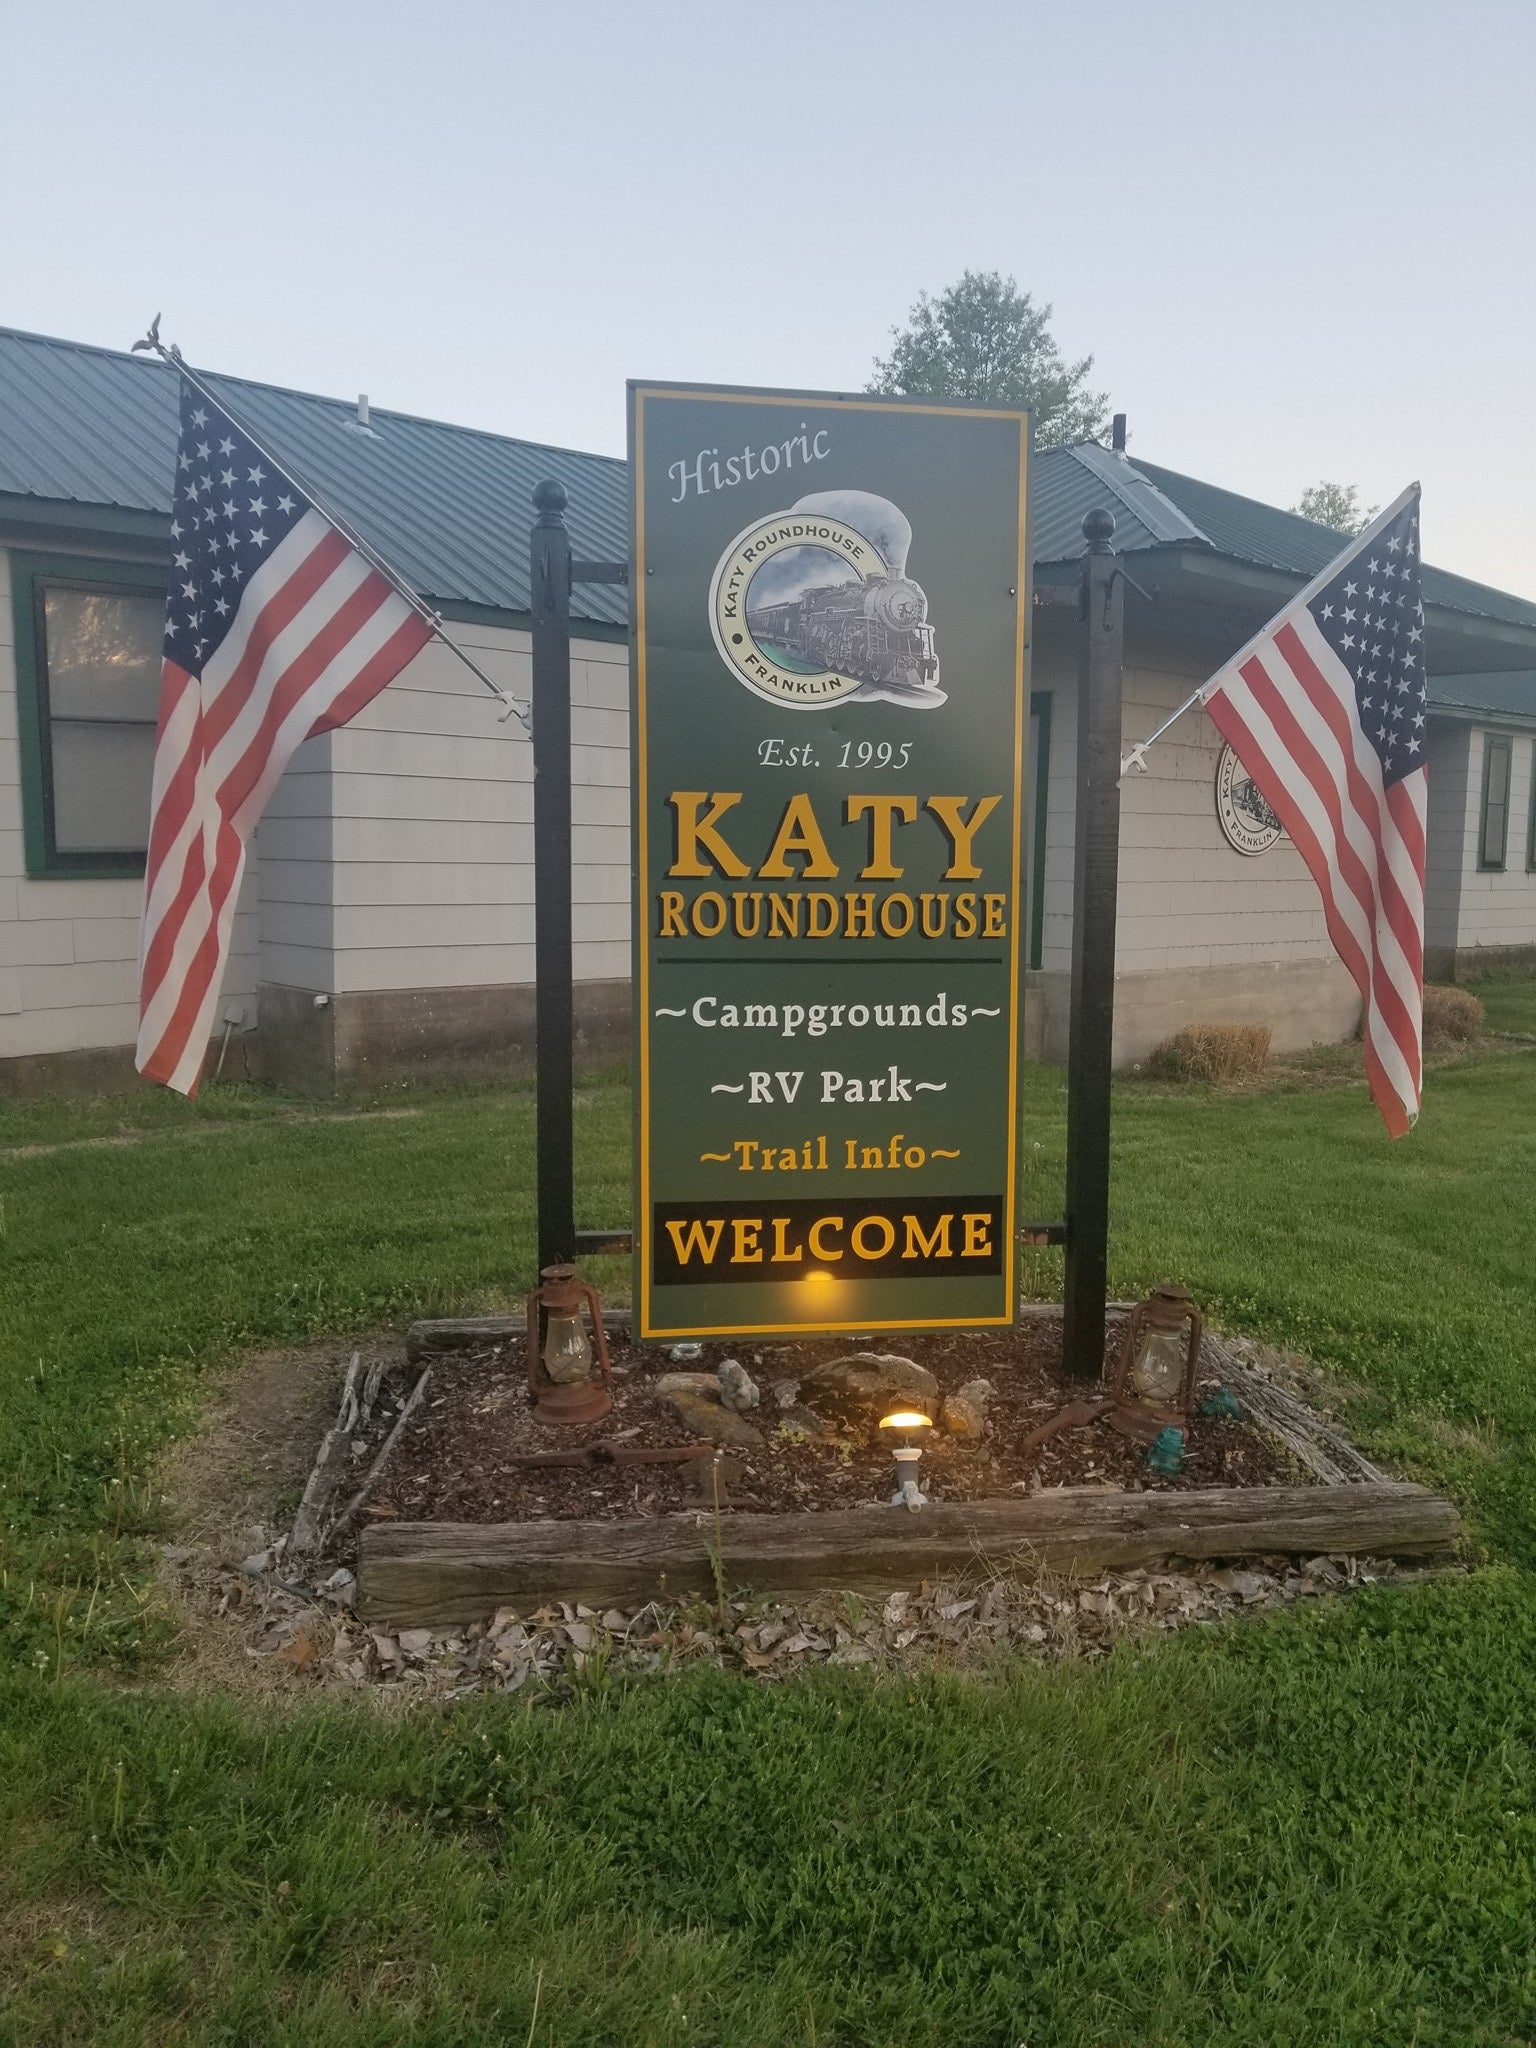 Camper submitted image from Katy Roundhouse - 5